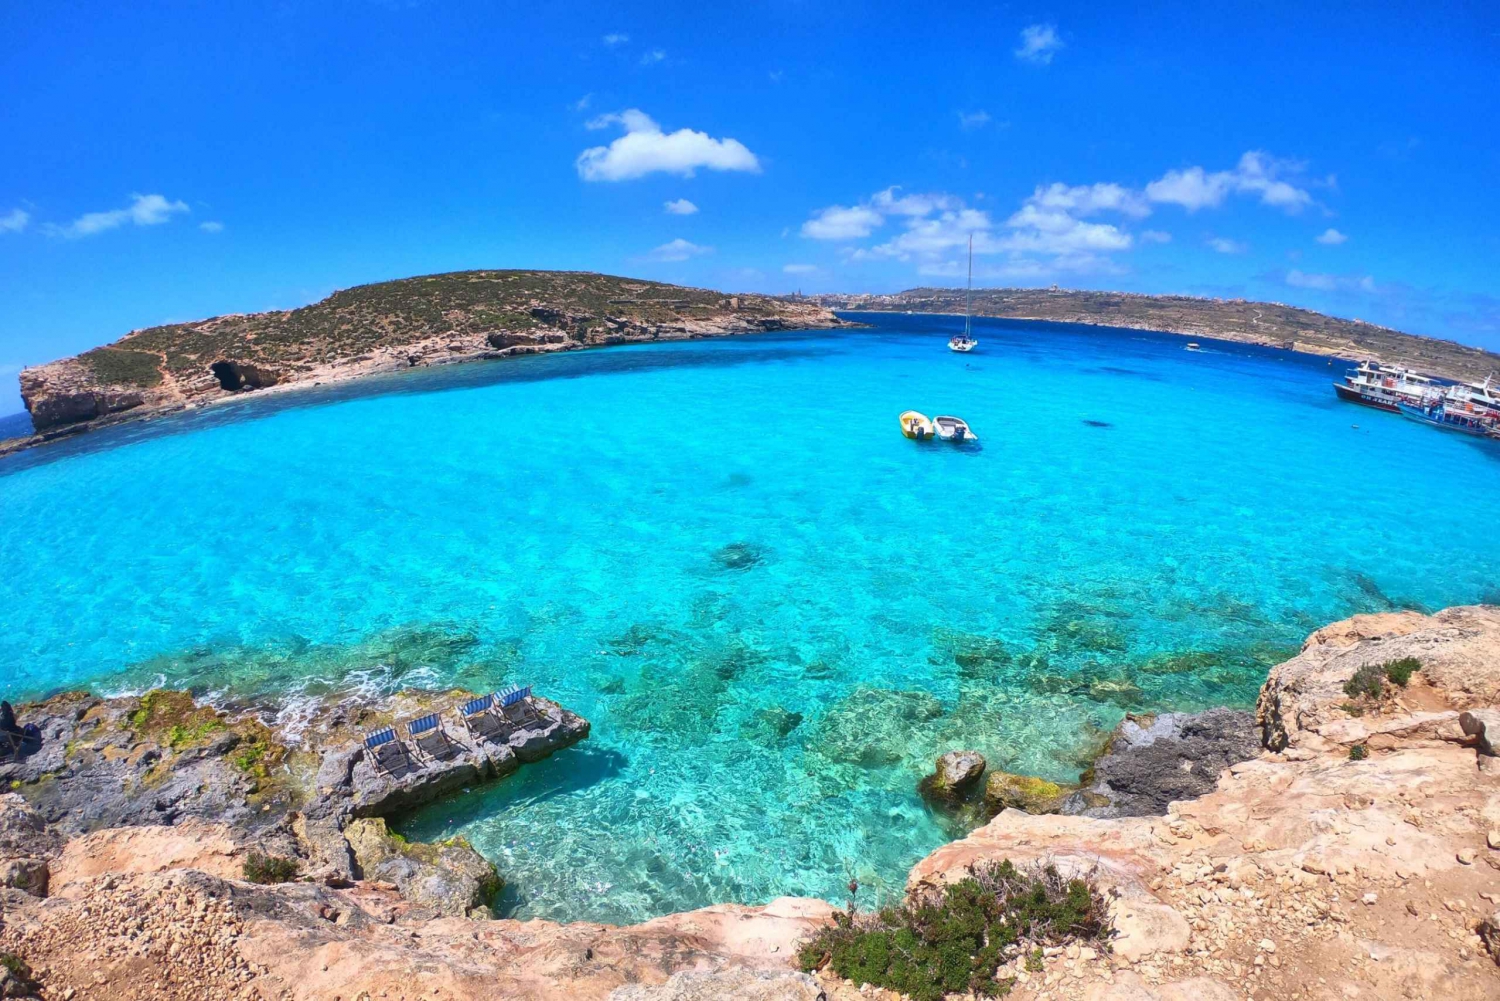 Mellieha: Private Boat Trip to Gozo, Comino, and Blue Lagoon